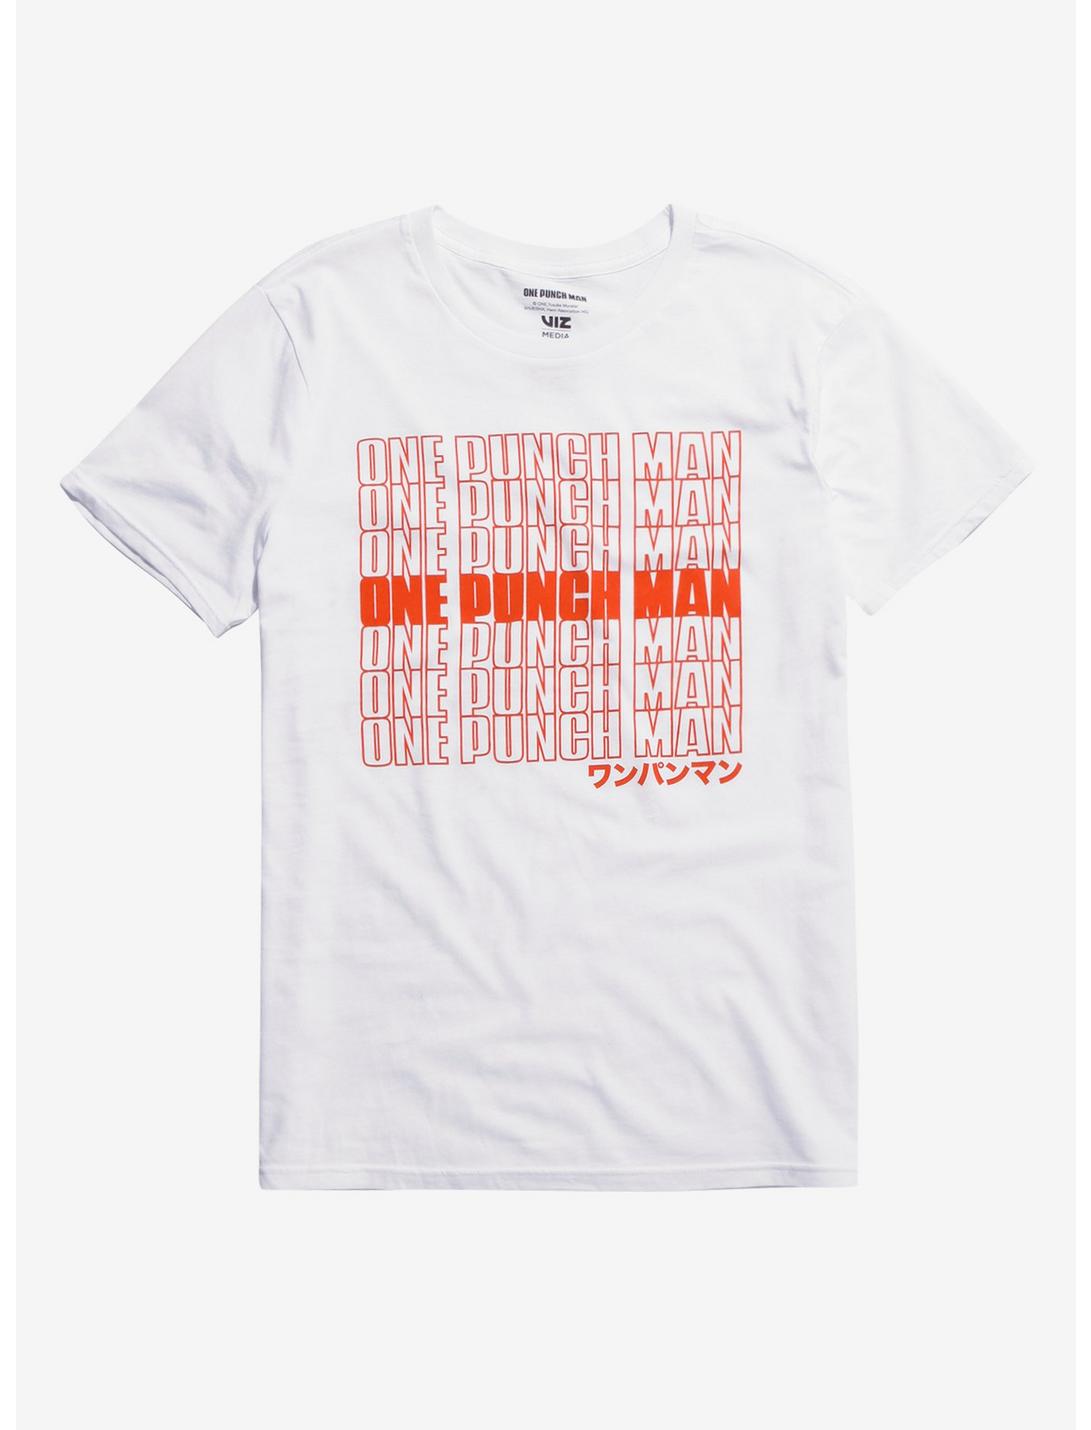 One Punch Man Grocery Bag T-Shirt, MULTI, hi-res